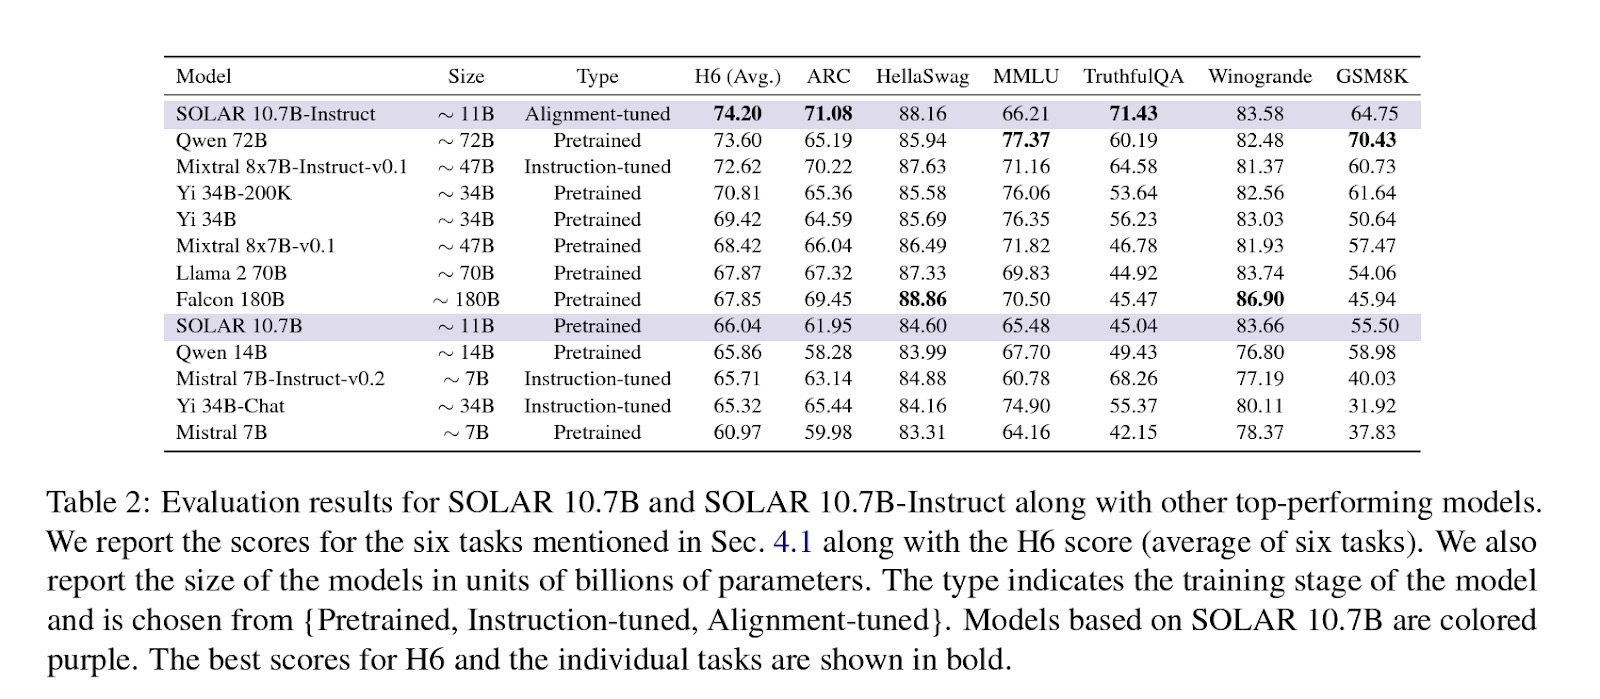 Evaluation results for SOLAR 10.7B and SOLAR 10.7B-Instruct along with other top-performing models. (Source: SOLAR 10.7B: Scaling Large Language Models with Simple yet Effective Depth Up-Scaling)